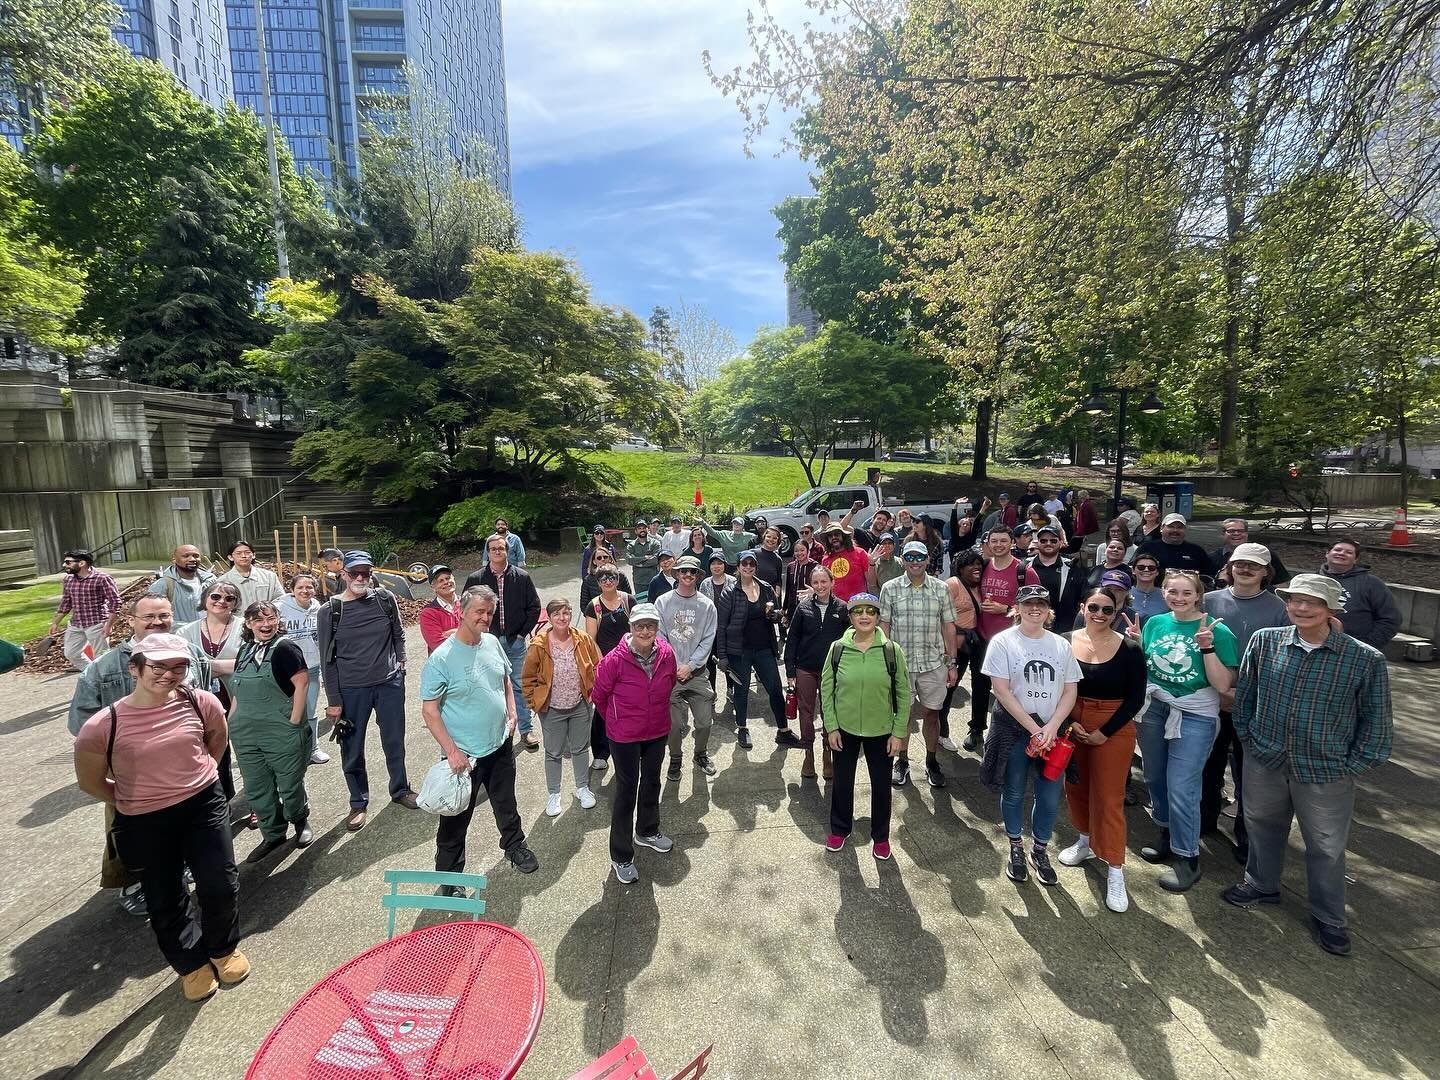 Last week, we had an amazing 100+ folks volunteer for our Earth Day event in the Park. 100lbs of mulch was spread throughout many sections of Seneca Plaza and 20lbs of trash picked throughout the entirety of the Park.

We wanted to give a HUGE thank 